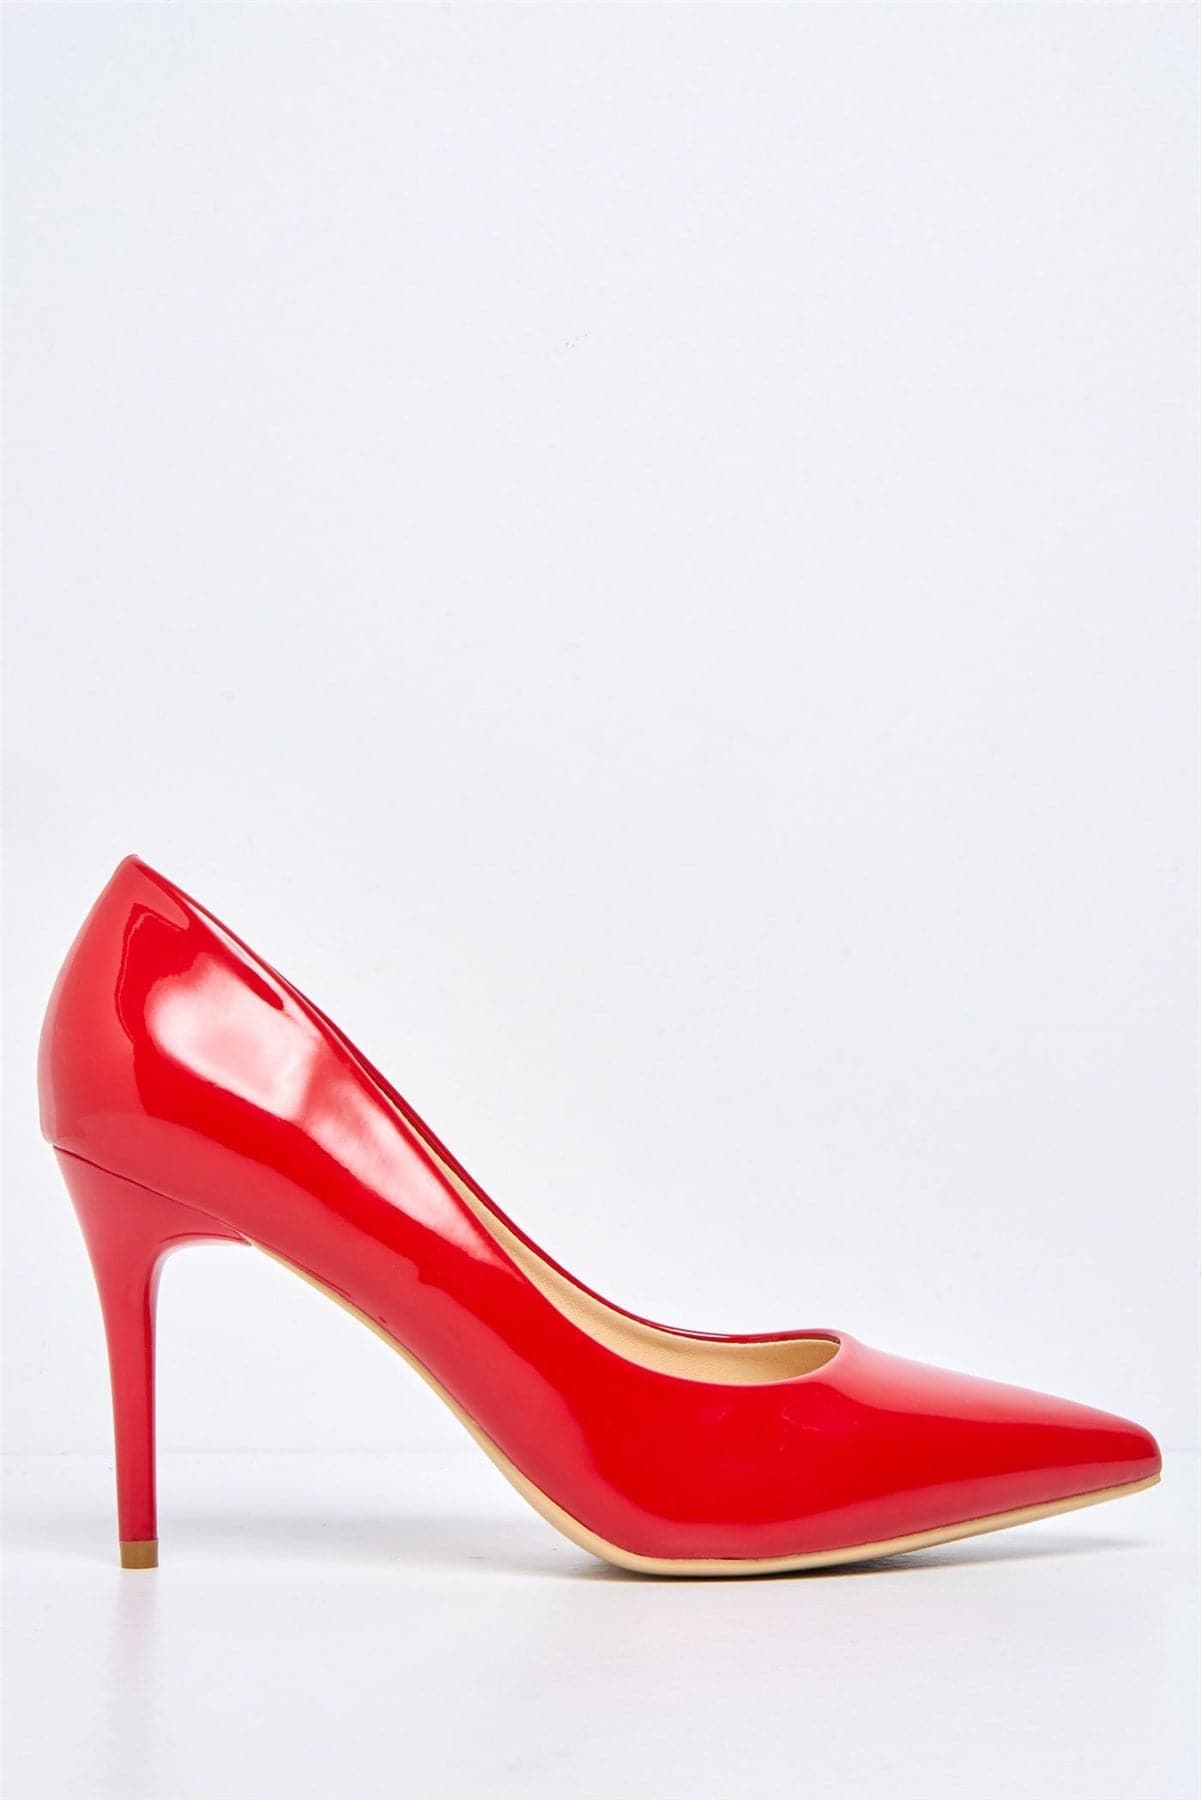 Miss Diva Ingrid Pointed Toe Court Heels in Red Patent